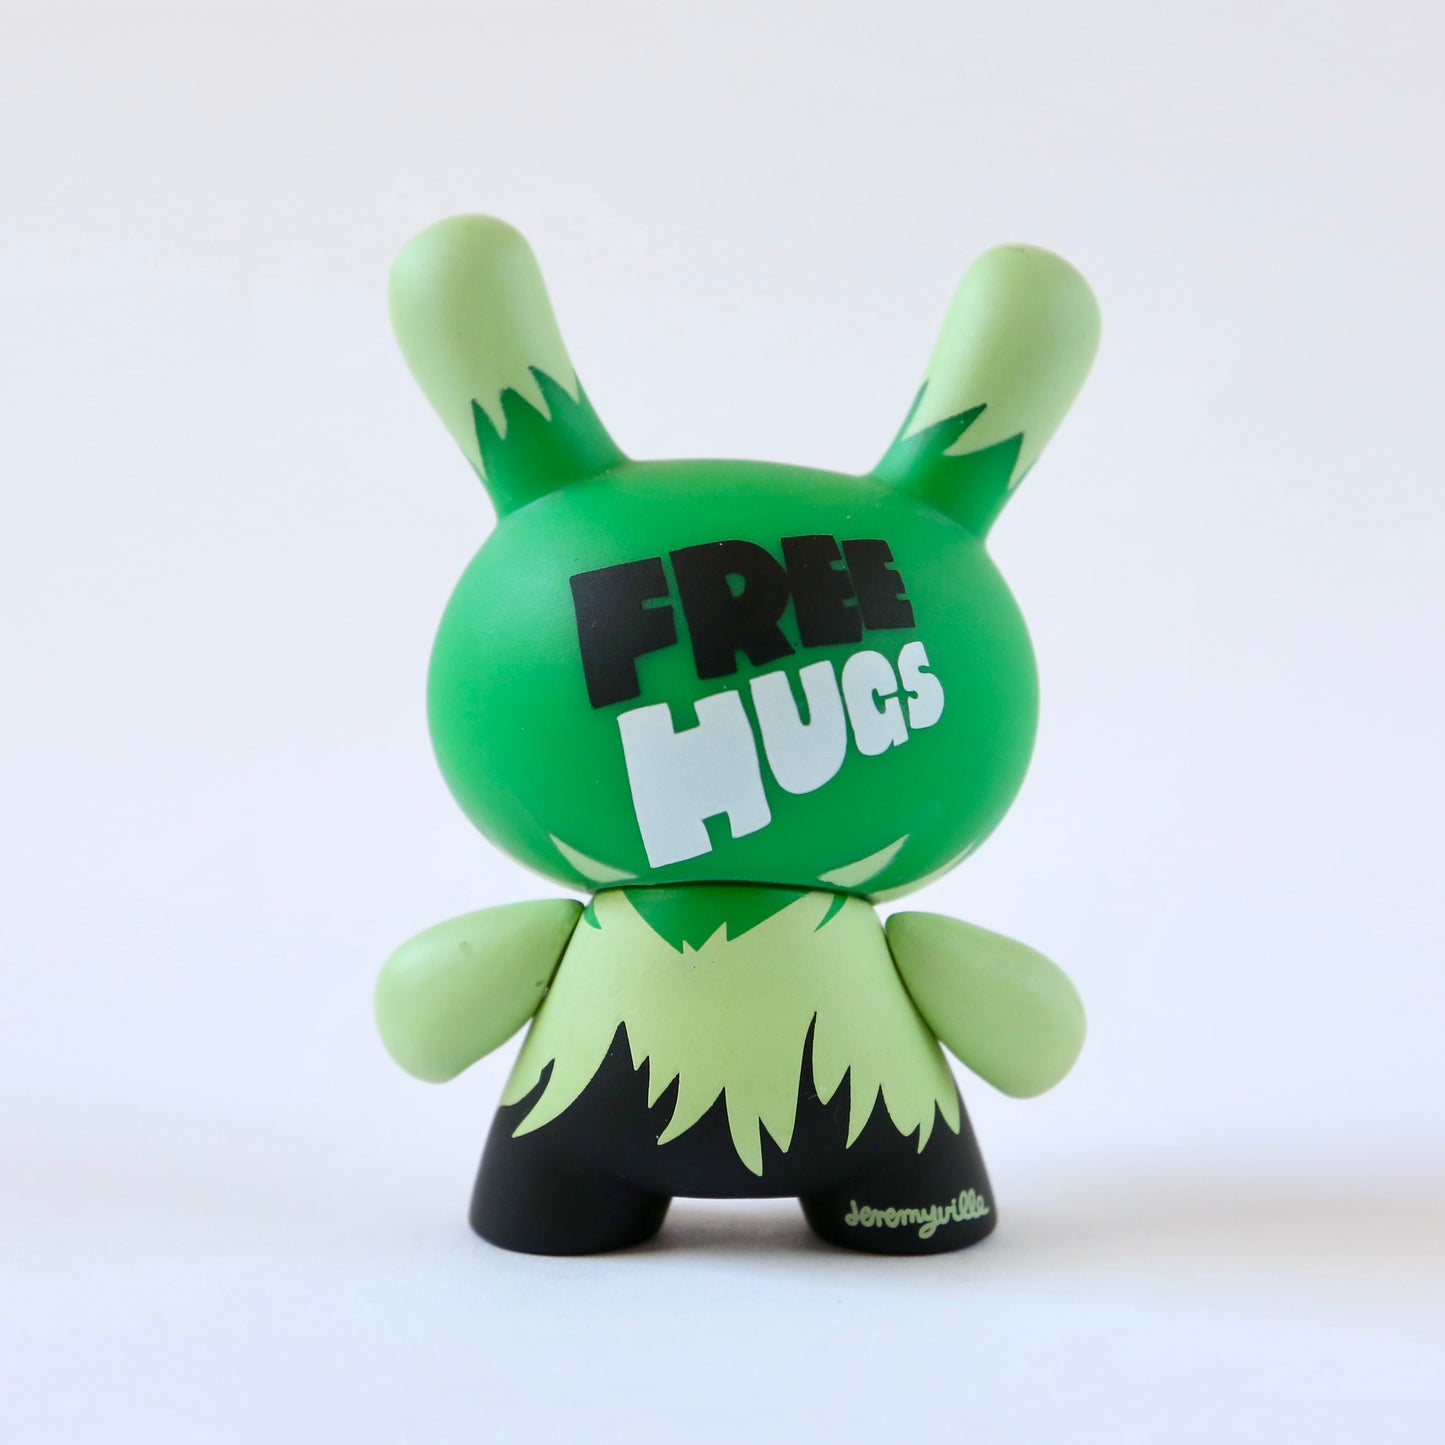 "Free Hugs" (1/25) 3in Dunny by Jeremyville x Kidrobot